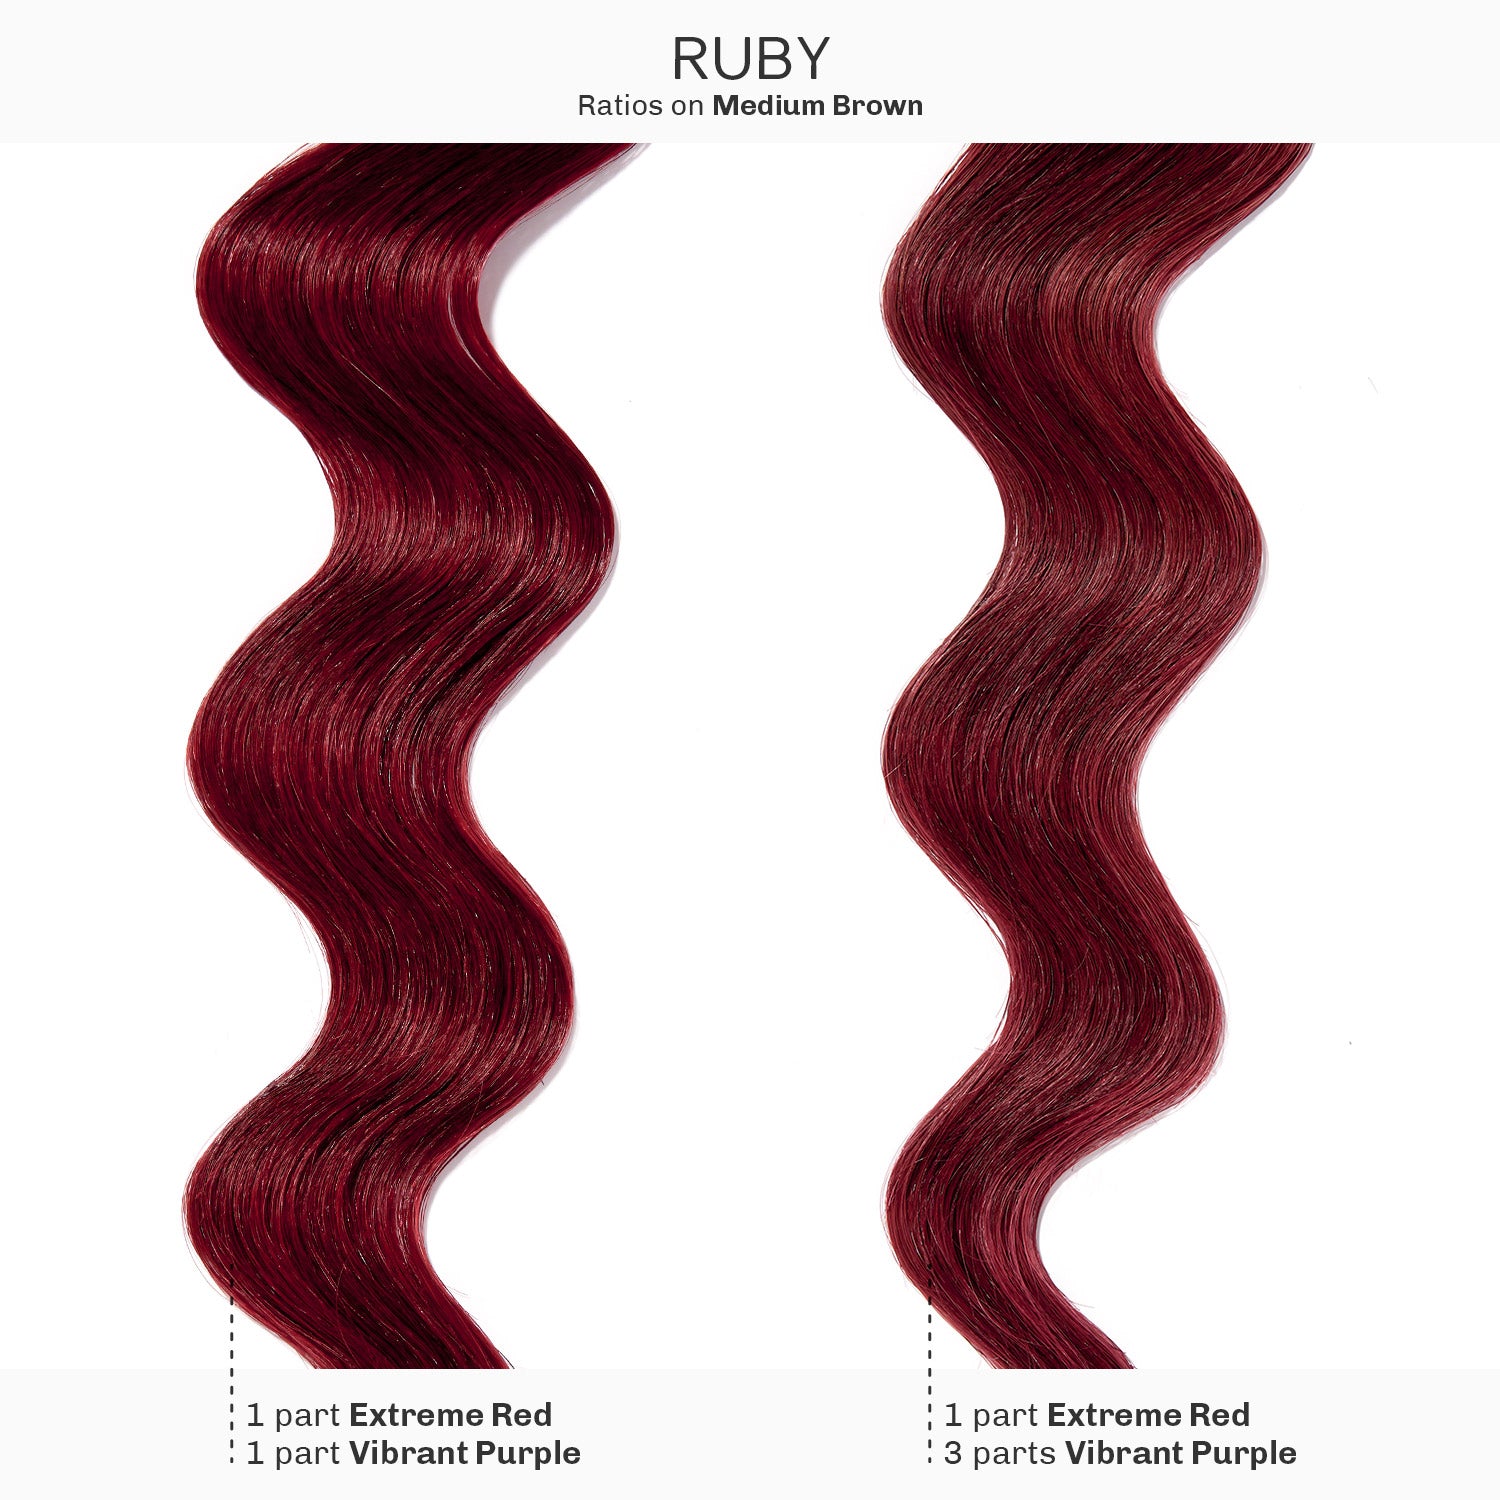 Ruby Conditioner Kit